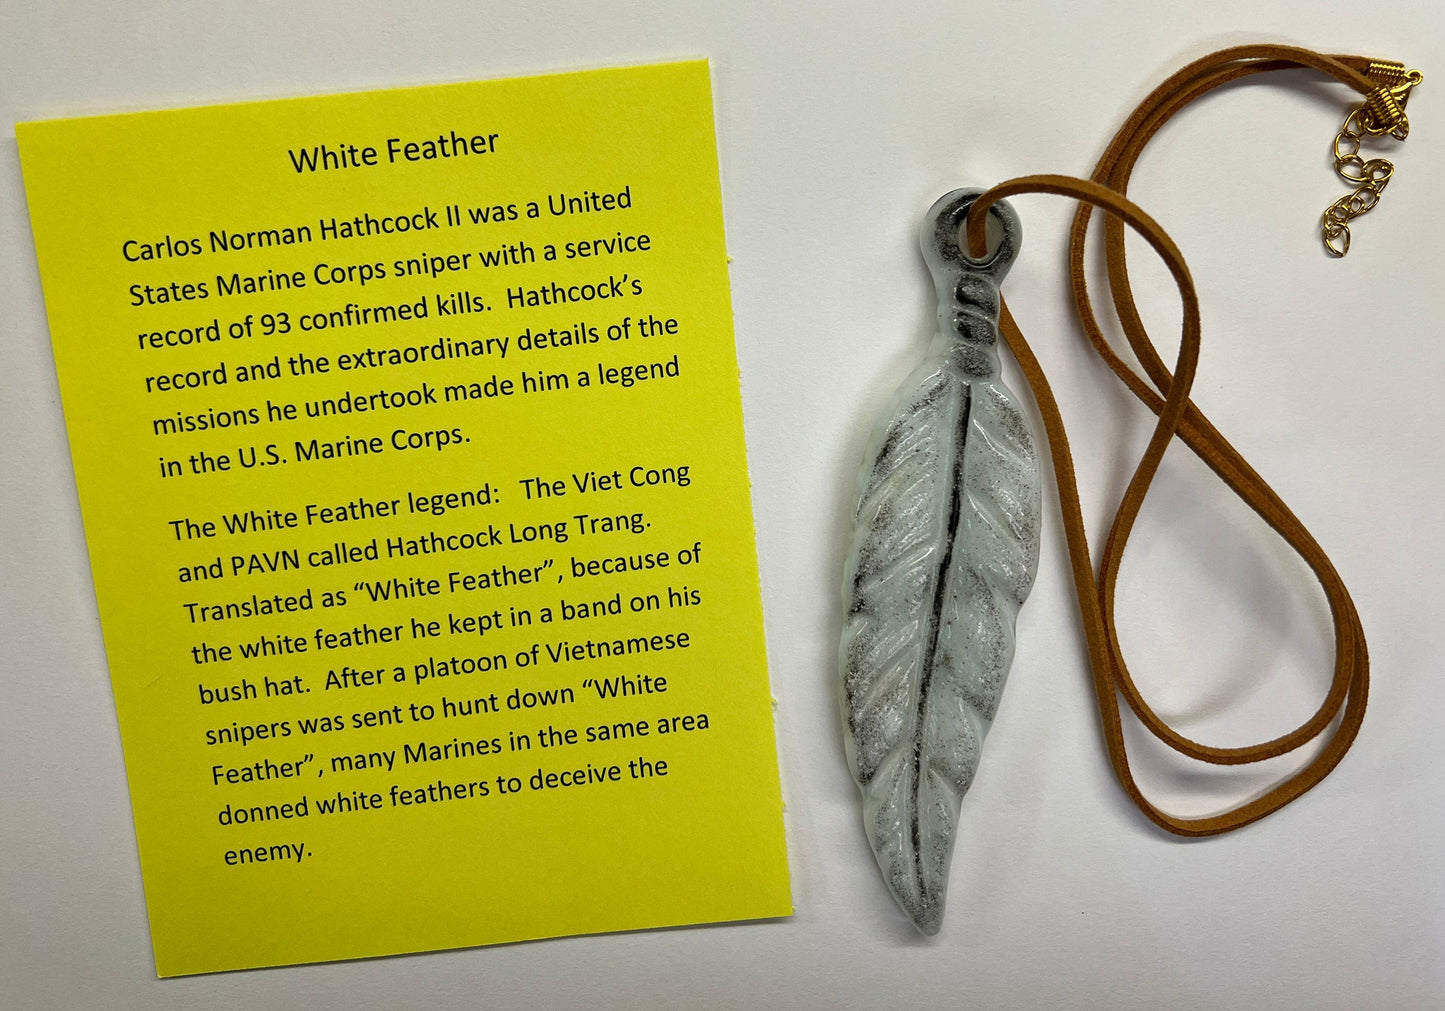 White Feather, Fused Glass, Amulet, tribute, Vietnam Veterans, white glass, 1" X 4" amulet, kiln fired, legend, White Feather, symbol, meaningful, Veterans, Marines, 24" leather cord, 